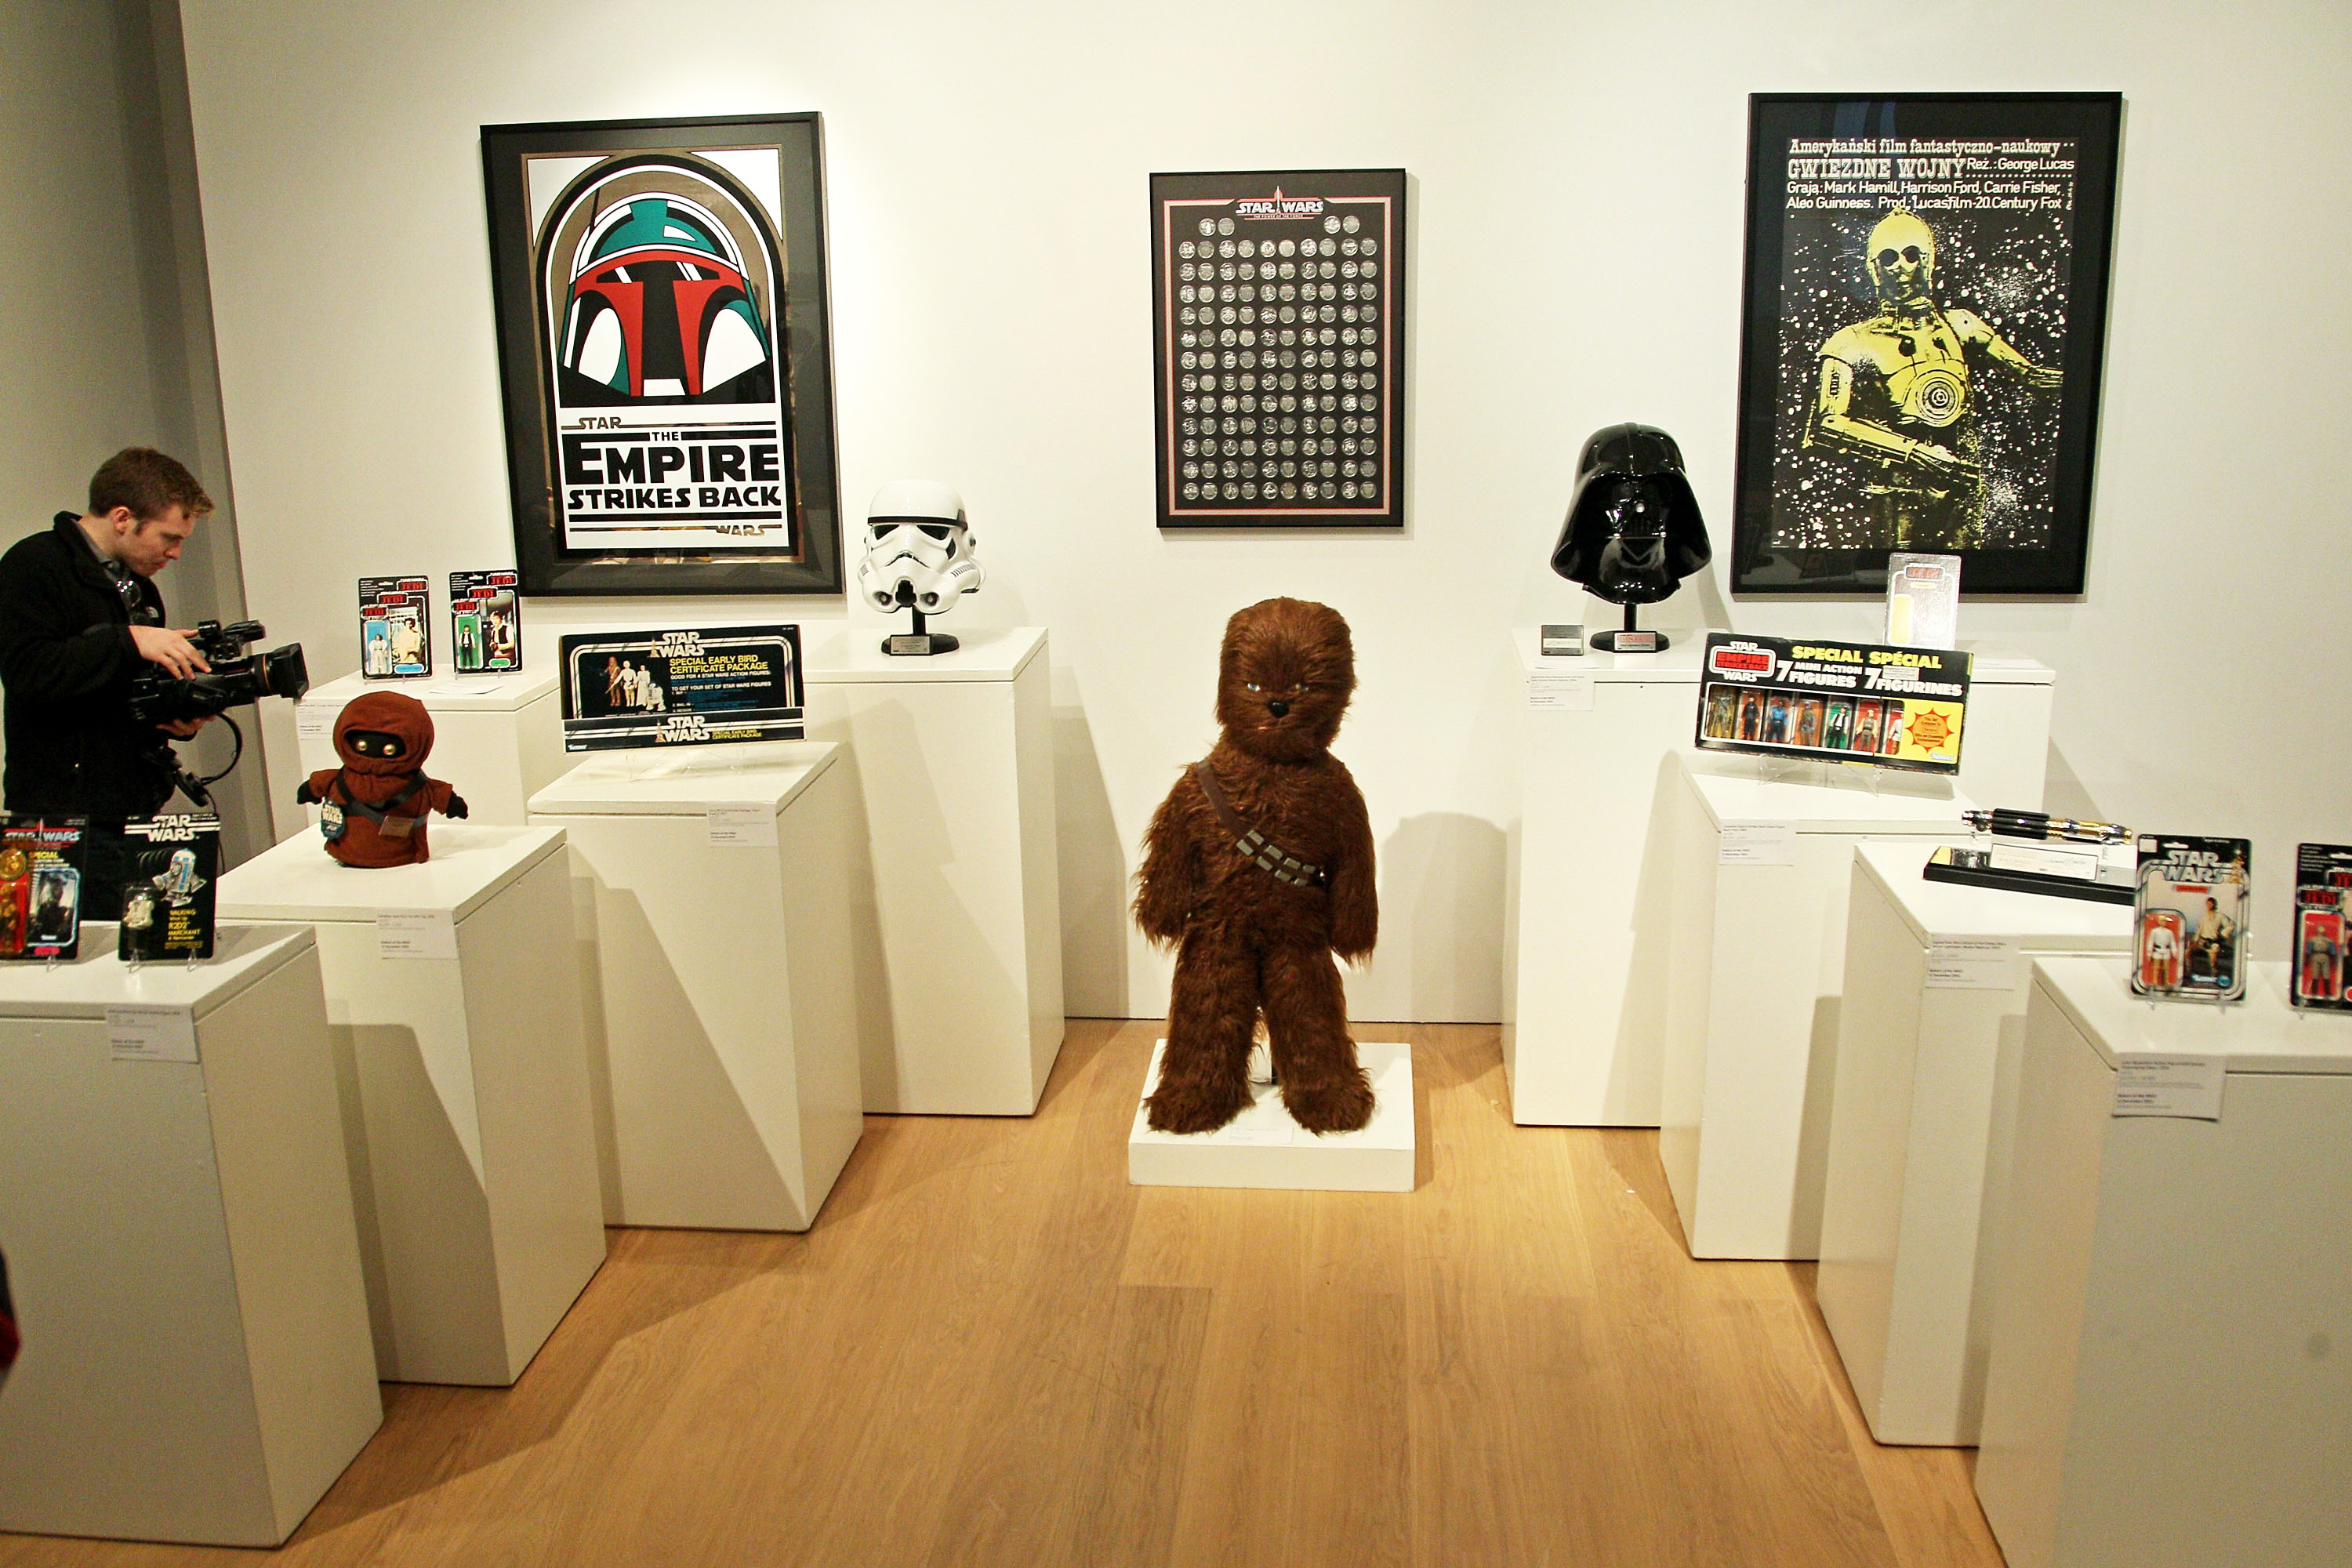 Return Of Nigo,  the first auction of Star Wars collectibles at Sotheby's on Dec. 2, 2015 in New York City.